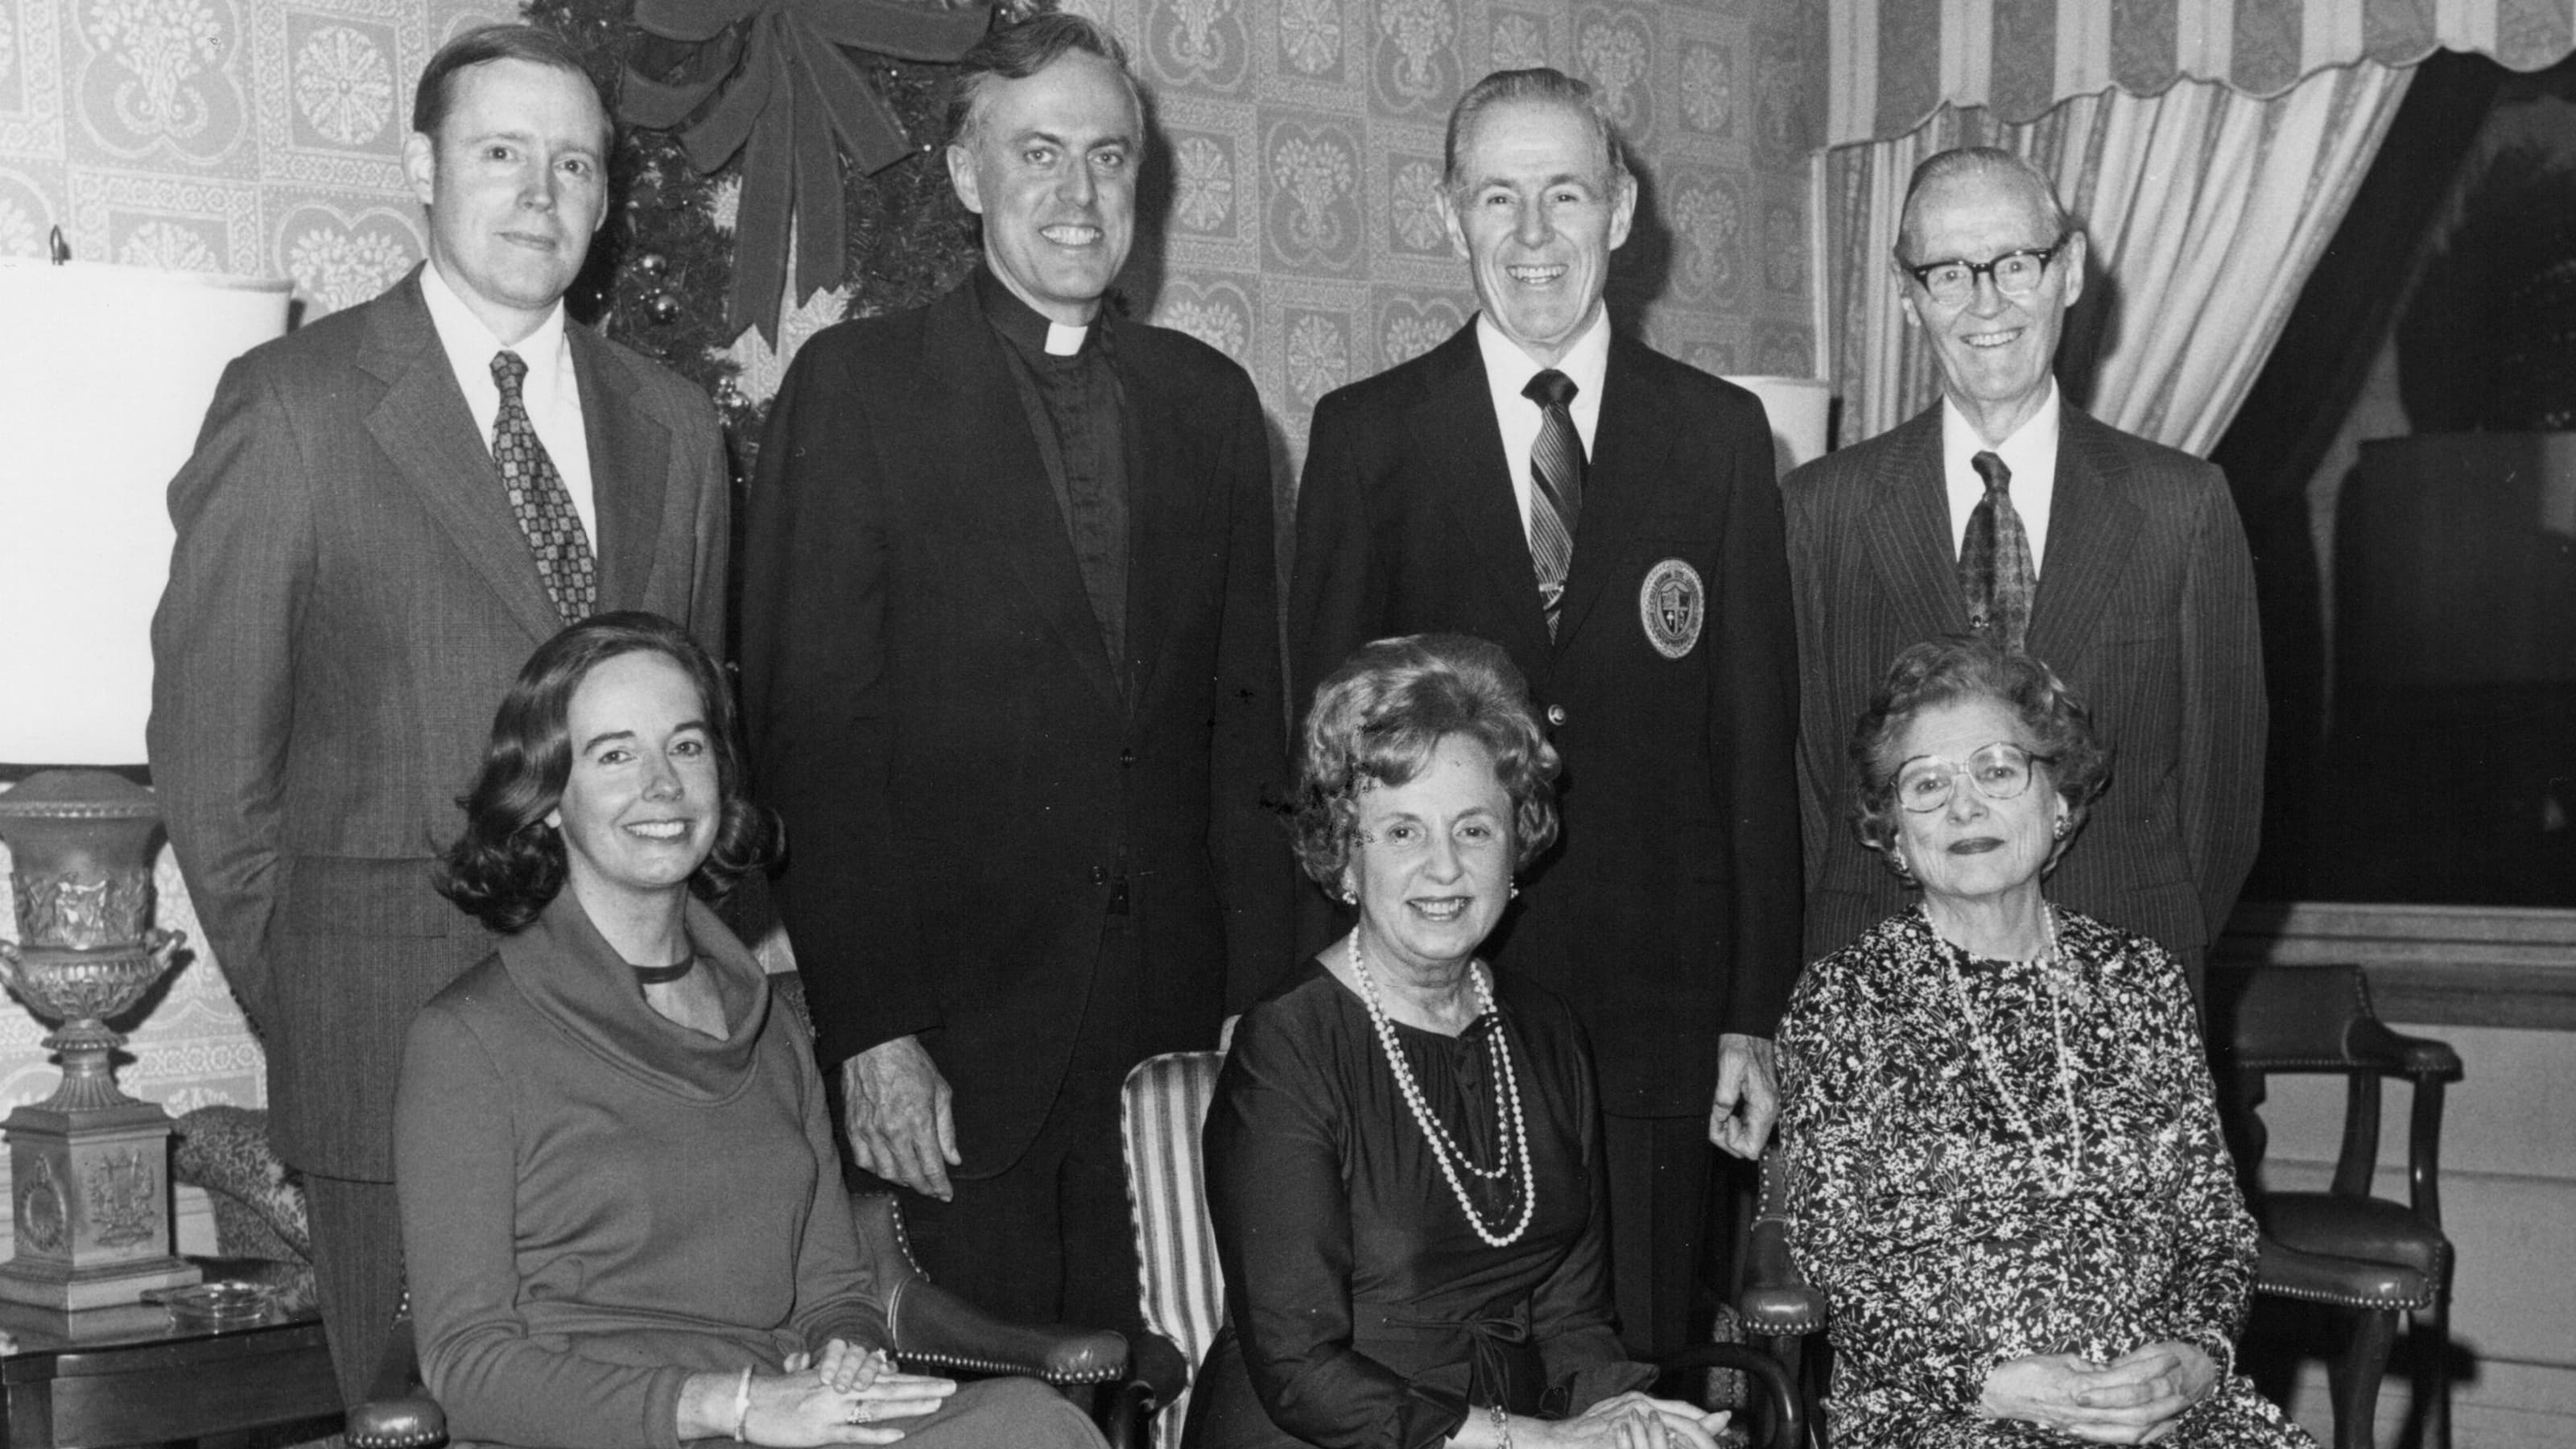 Donald I. MacLean, S.J., with members of the Trainer family: Regina Trainer, Anne Trainer, Peg Trainer, William Trainer, Raymond Trainer ’25 and Clem Trainer ’22.